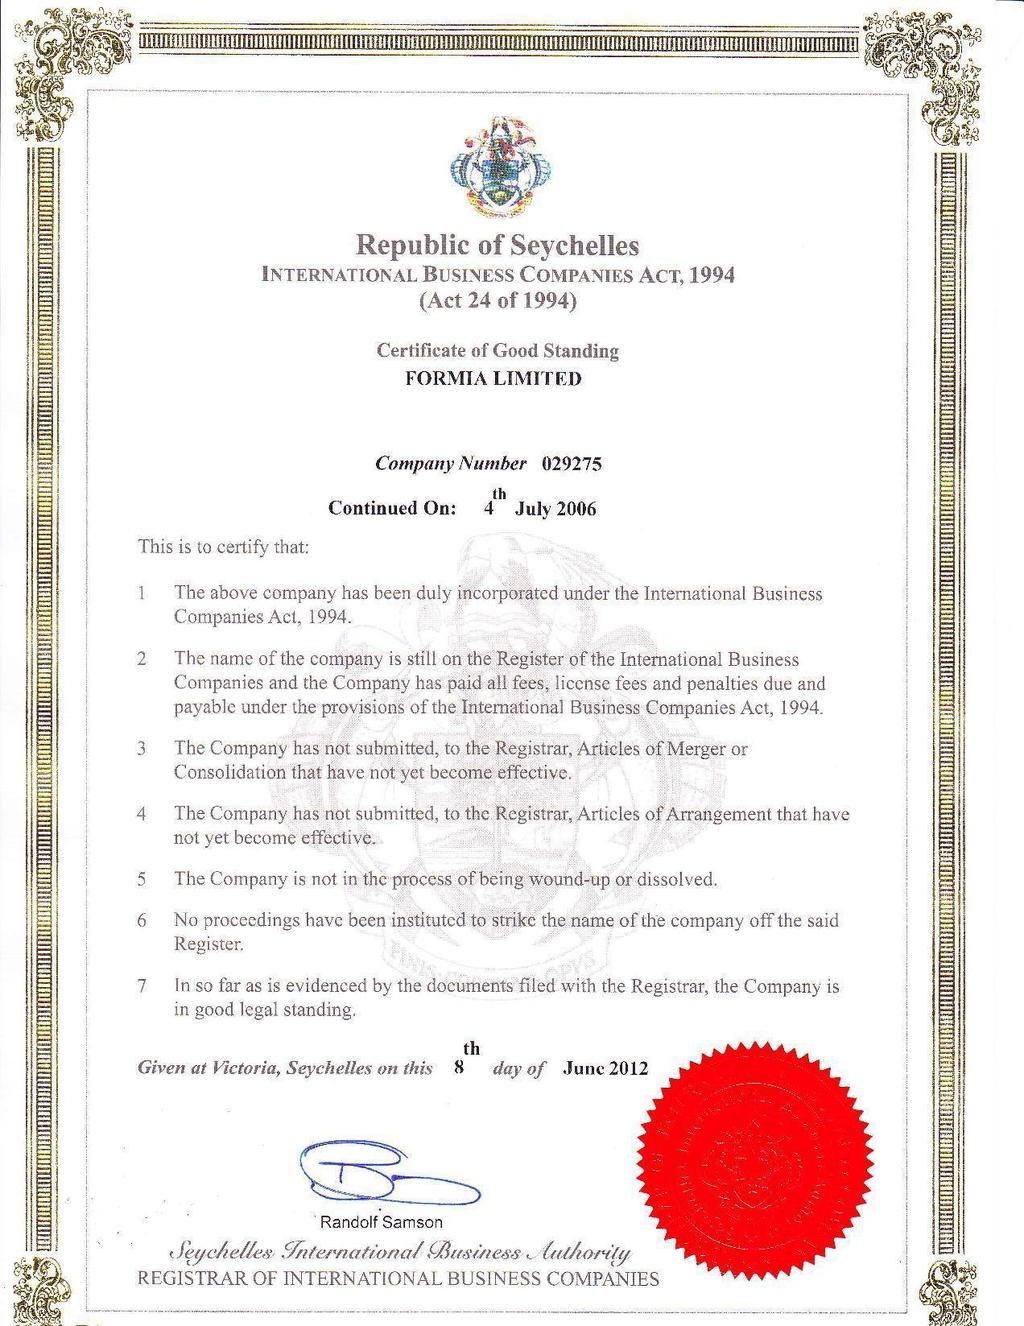 Republic of Seychelles IxrnnNauoNAL BusrxEss Couplxrns Acr, 1994 (Lct 24 of 1994) Certificate of Good Standing FORMIA LIMITED This is to certify that: Company Number 029275 Continued On: 4'h J.